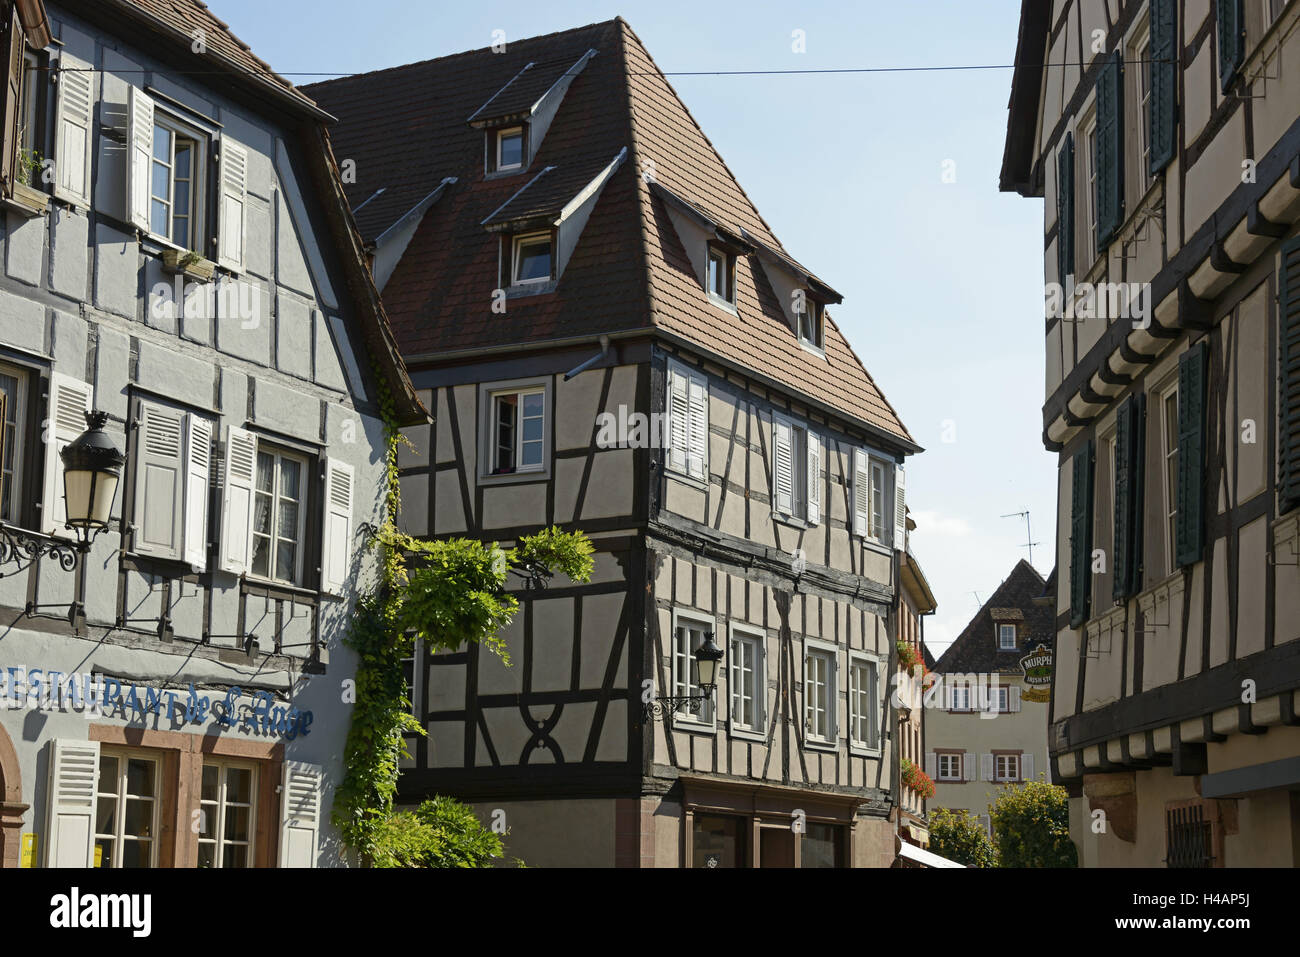 Wissembourg, Old Town, half-timbered houses, Alsace, France, Stock Photo